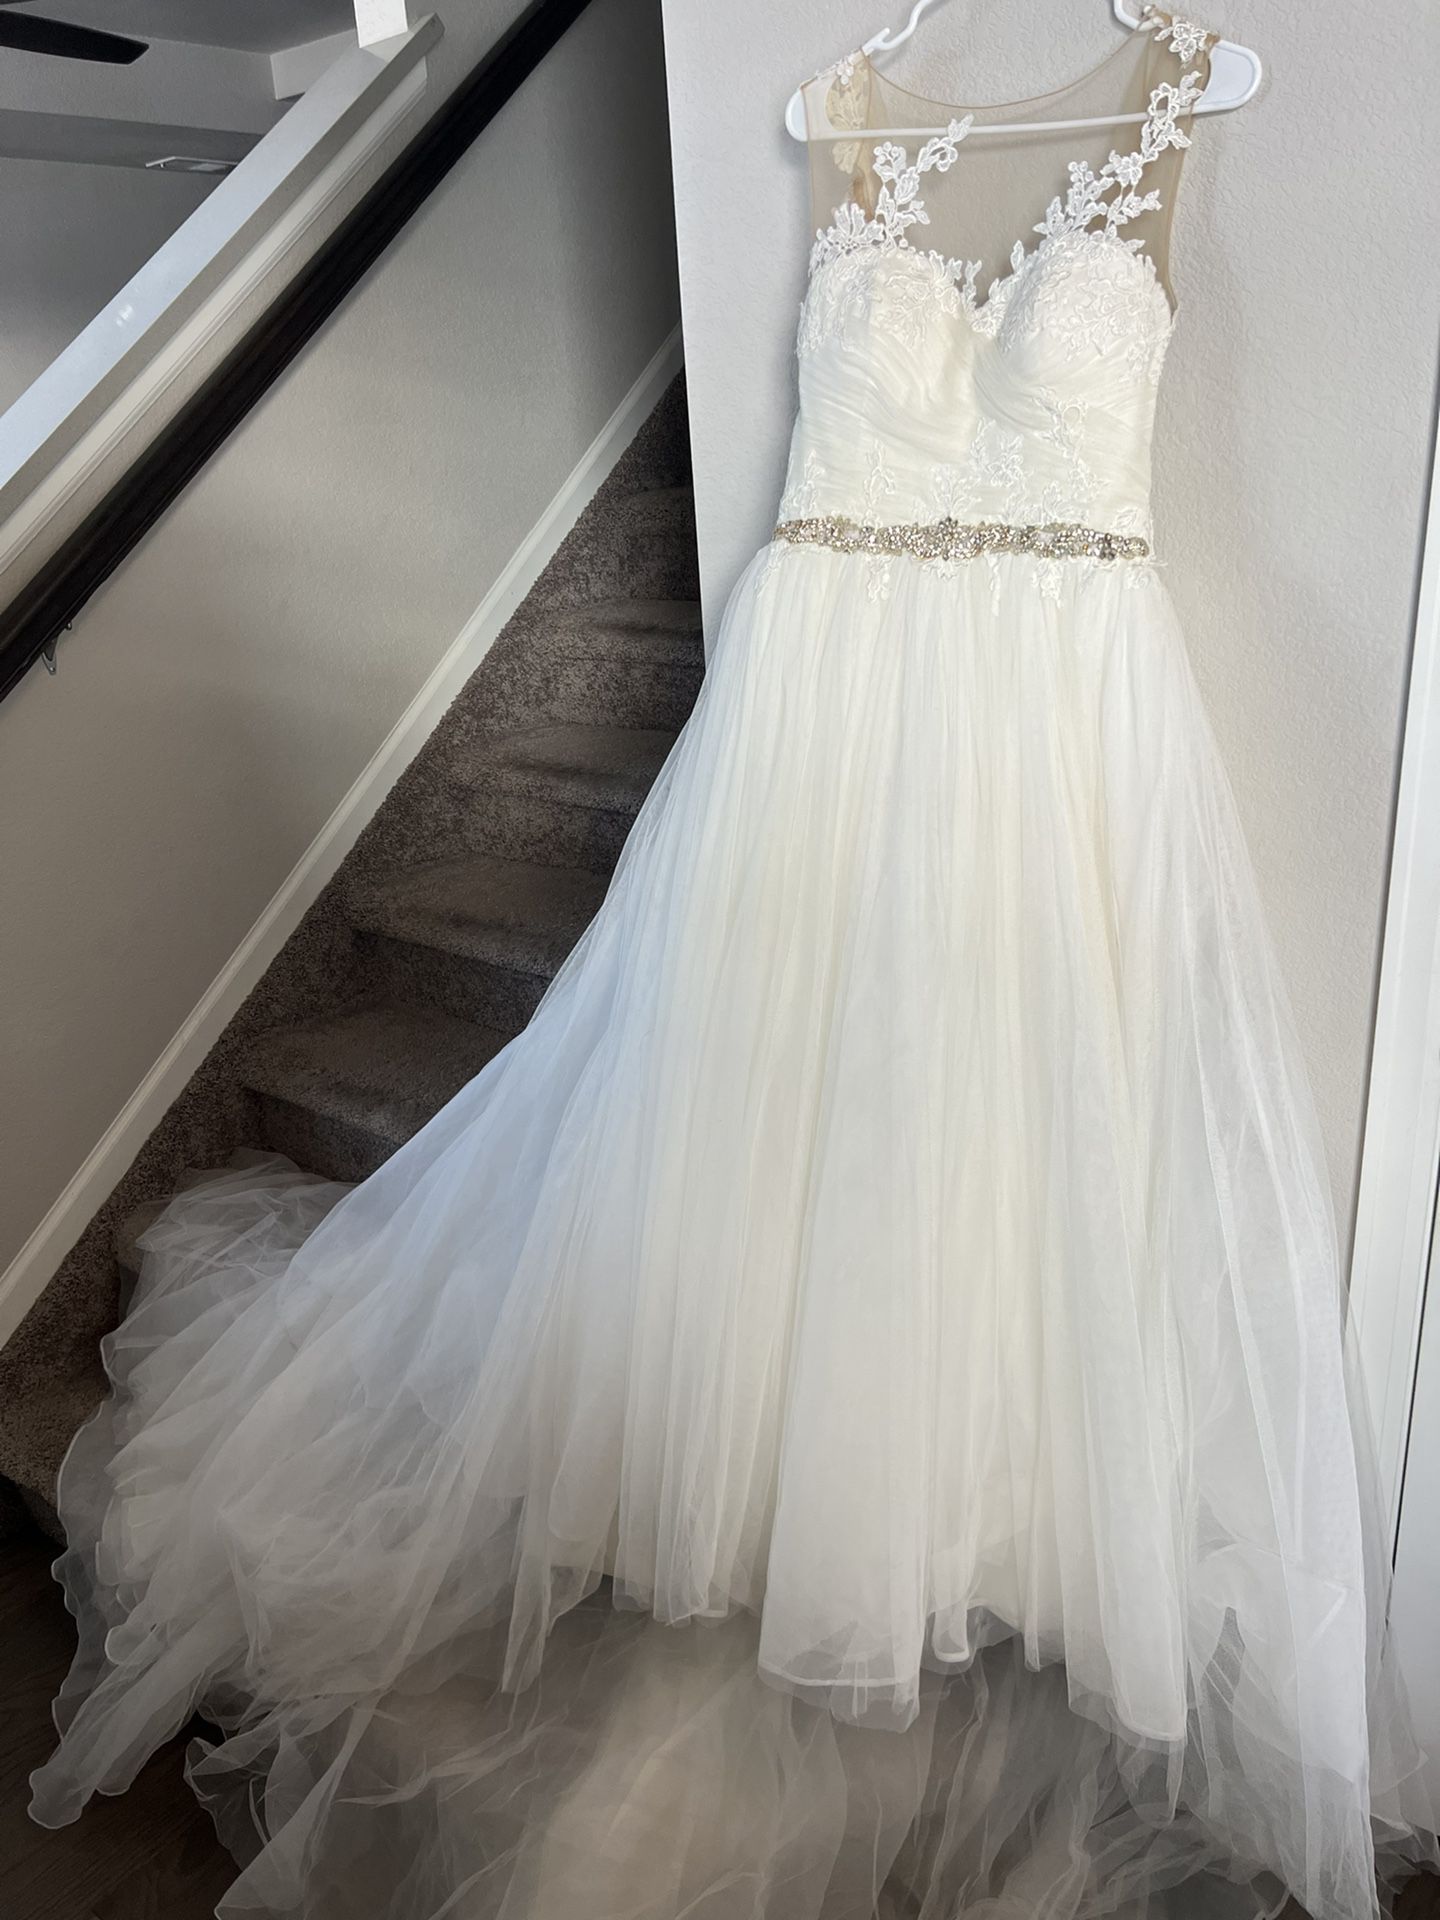 Mary’s bridal gown